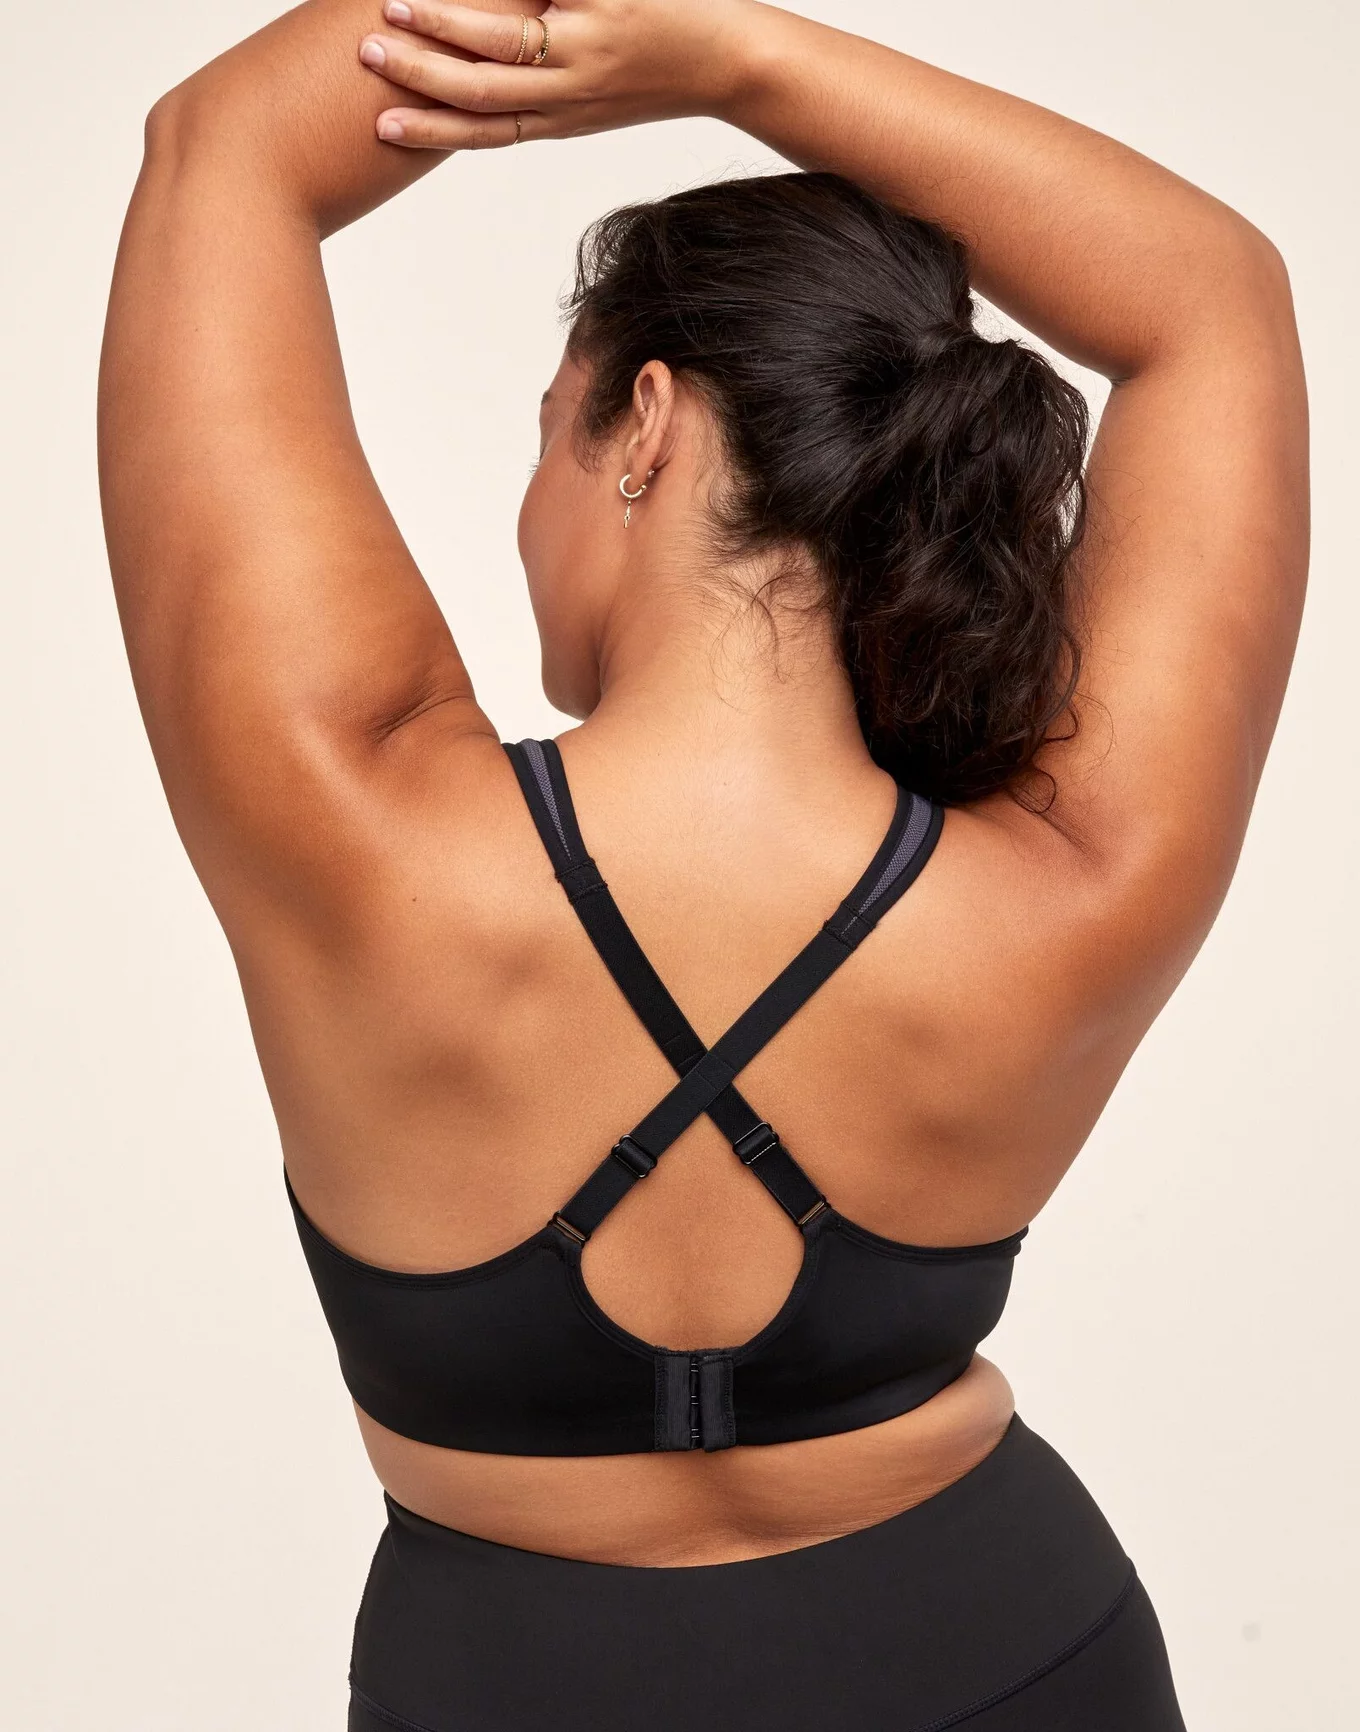 Lane Bryant - Sport bras that totally support & look super cute